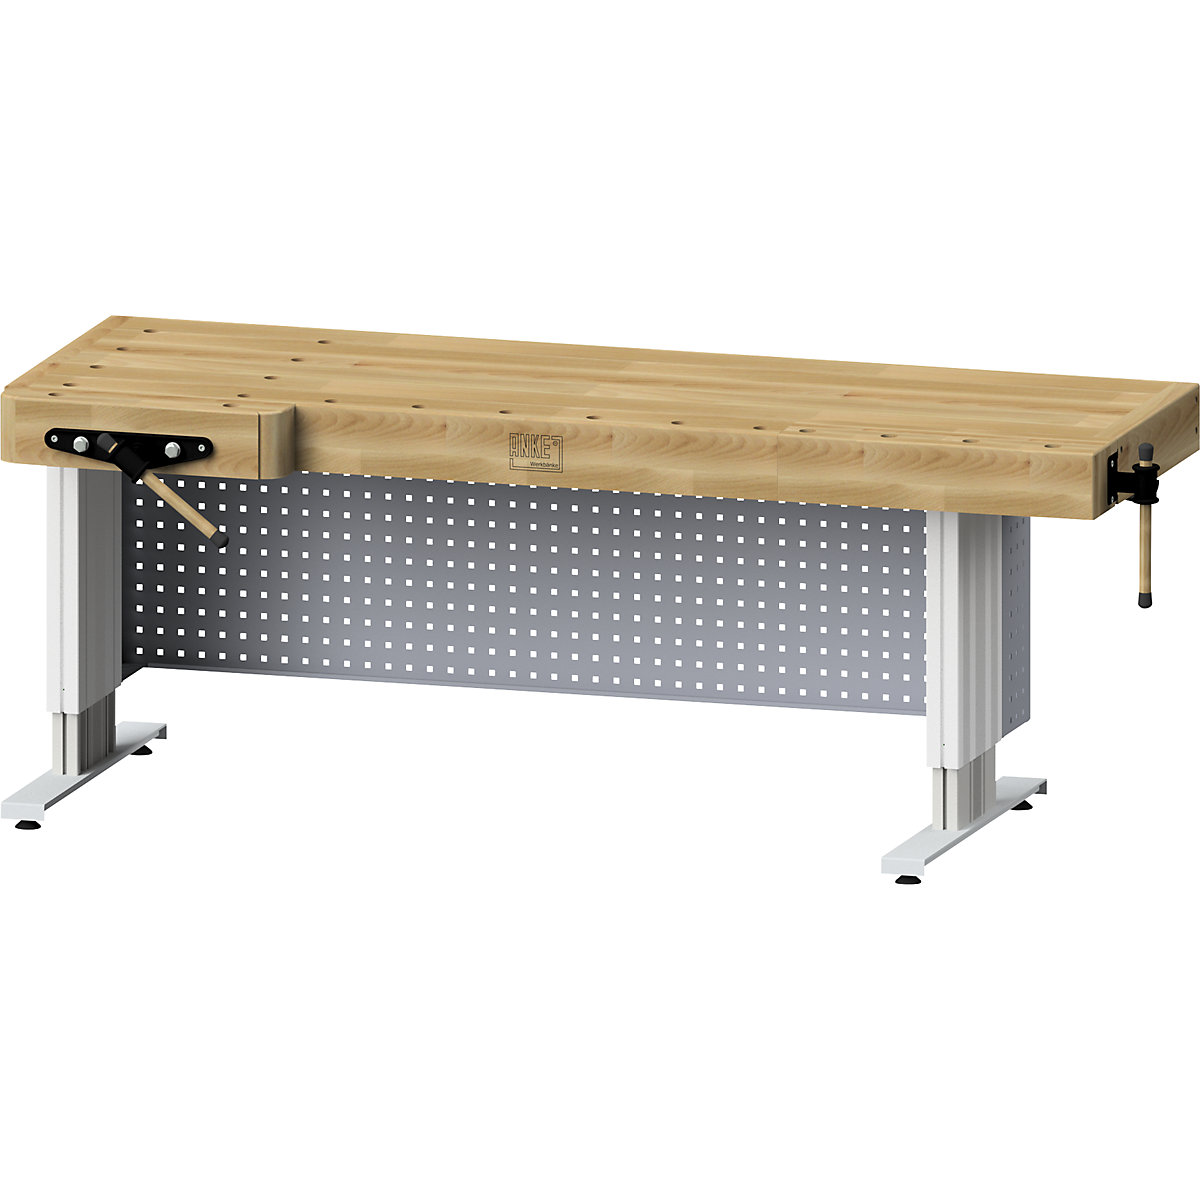 Professional planing bench, electrically height adjustable